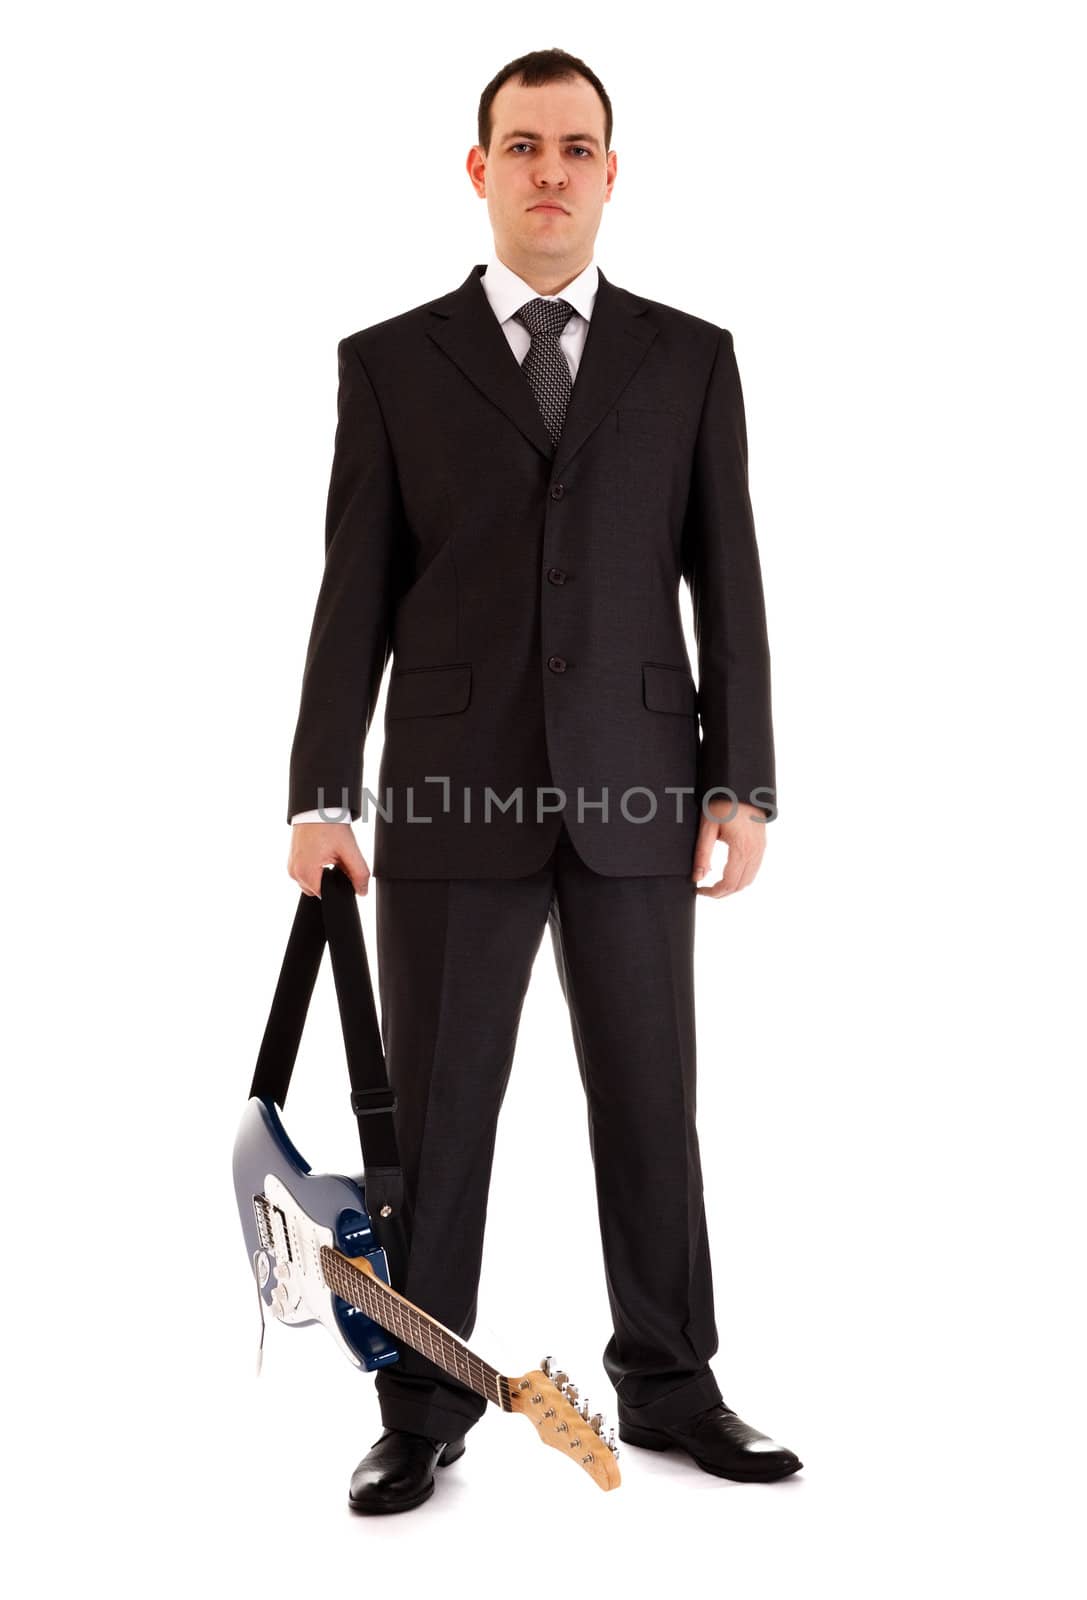 man in black suit stand with electric guitar, isolated on white background